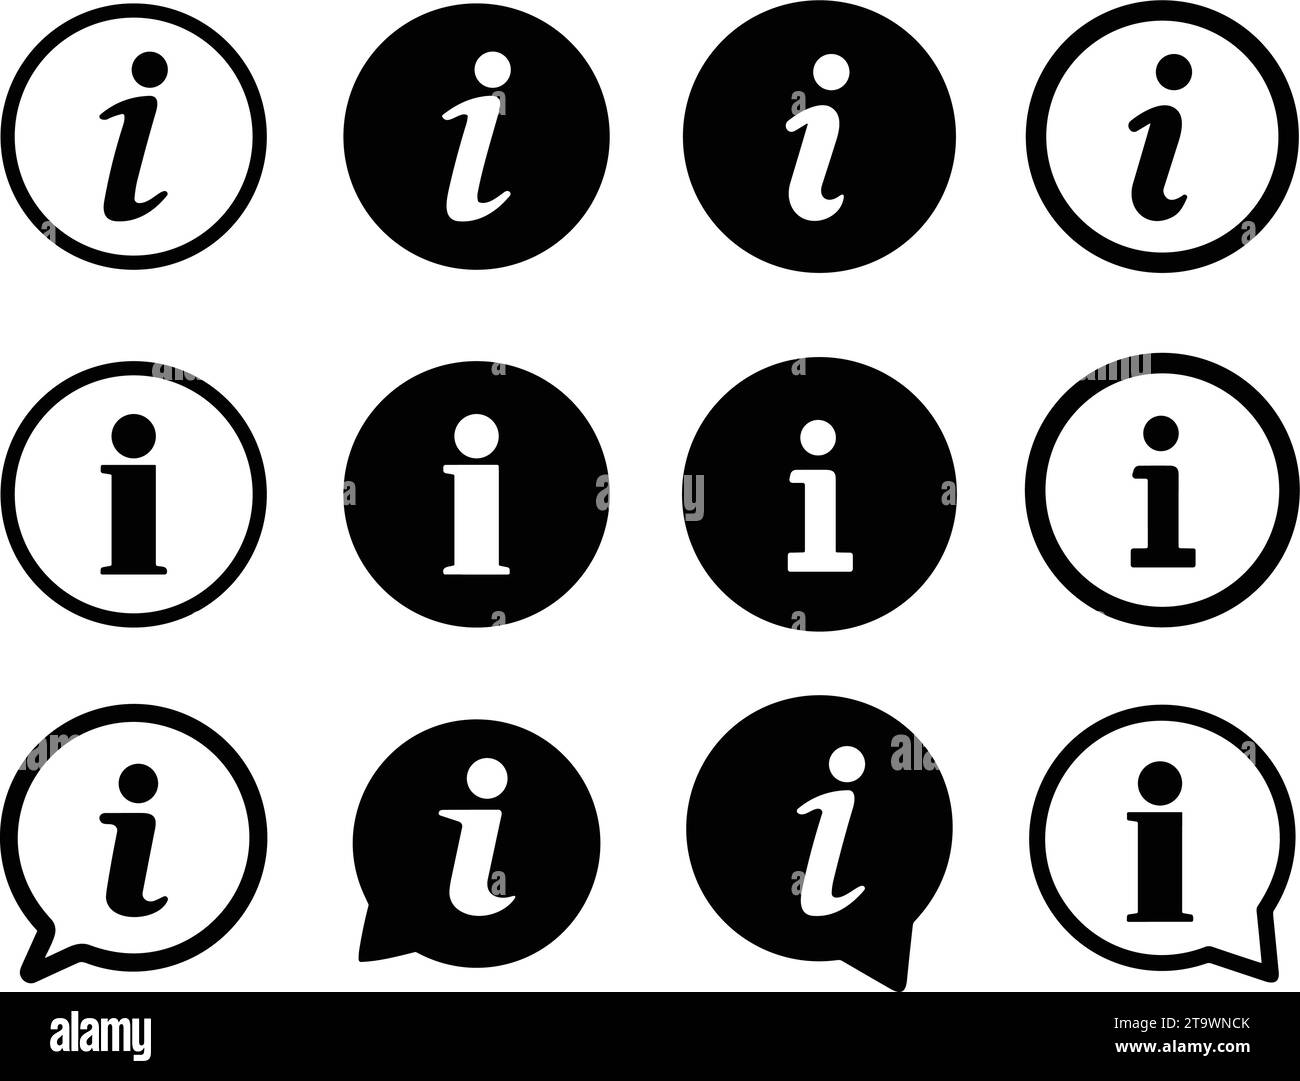 Info icons set. Information icon collection. Info button. Info symbol flat and line style - stock vector. Stock Vector